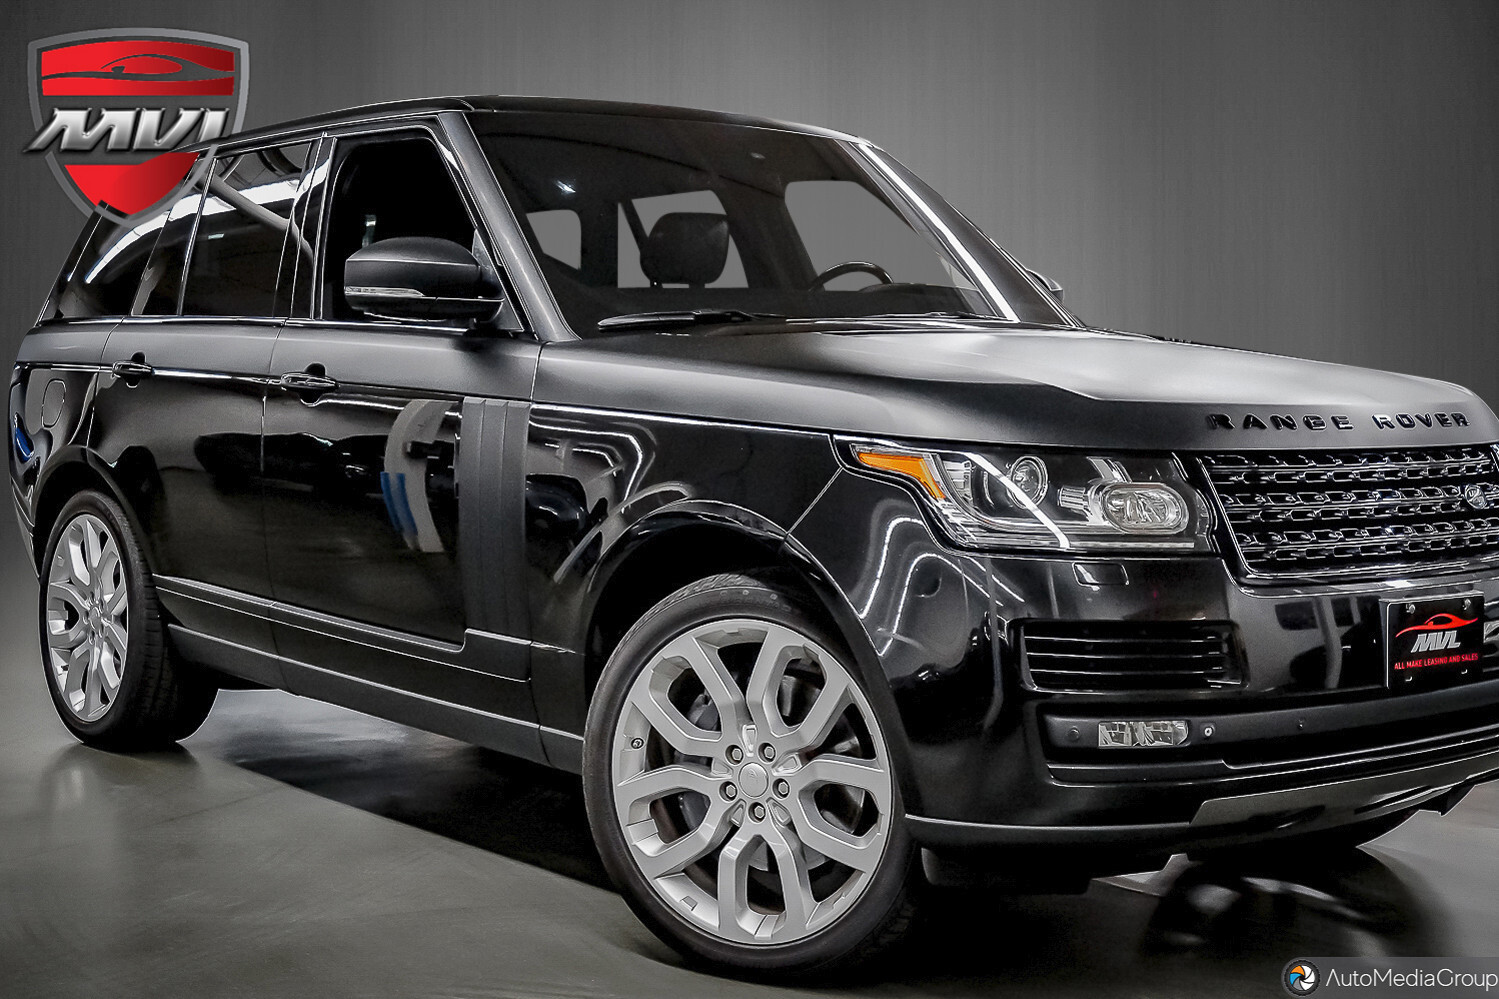 2014 Land Rover Range Rover 5.0L V8 Supercharged -7.99% LEASE RATE- 22 INCH WH